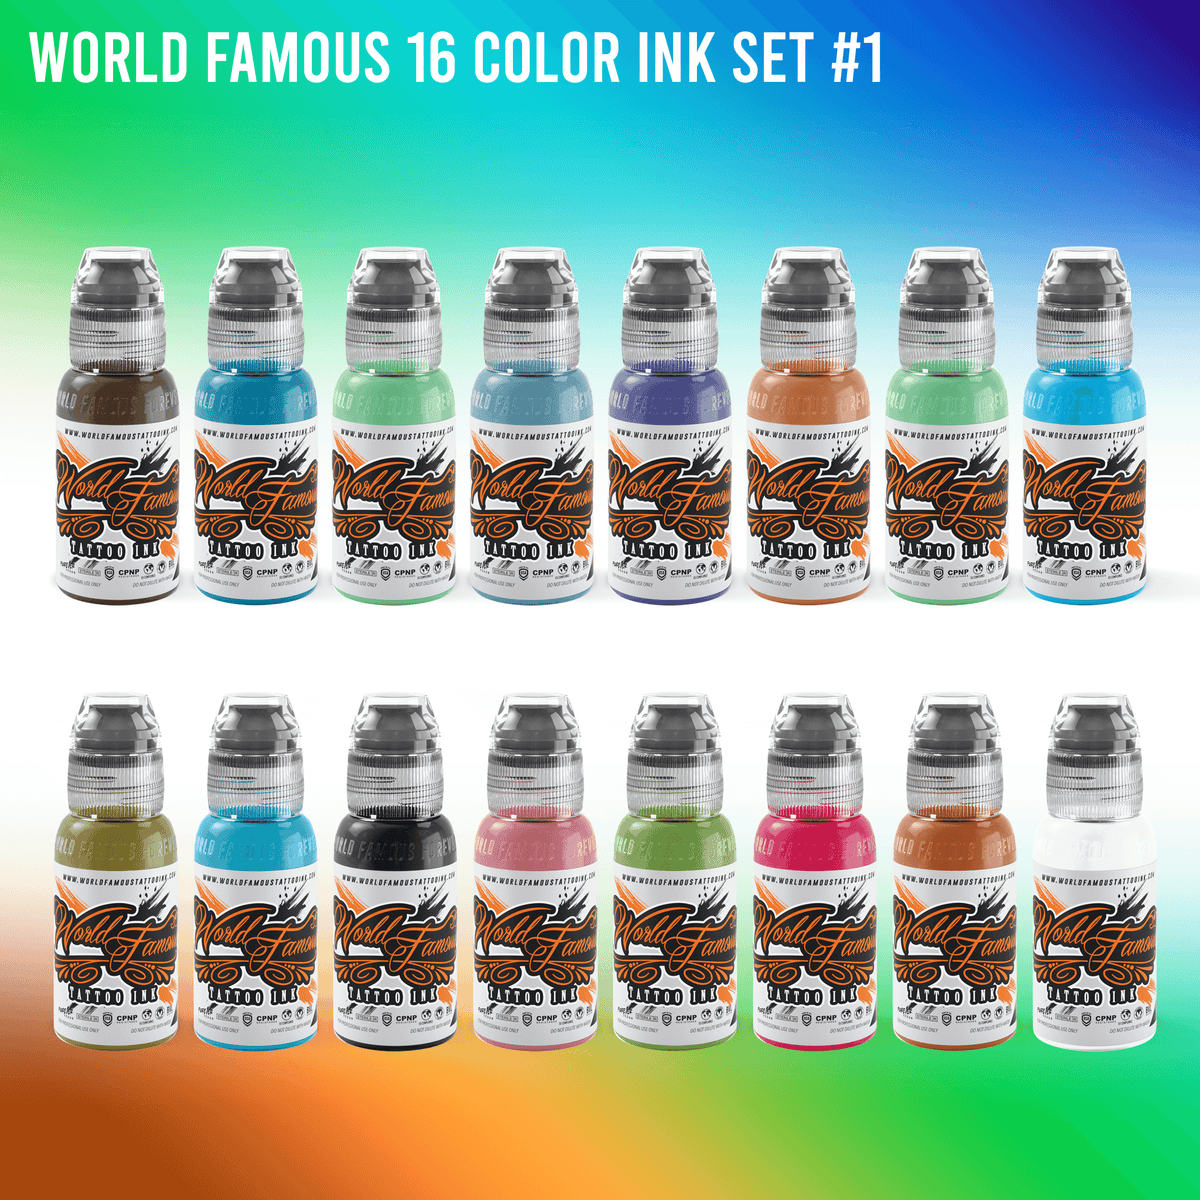  World Famous Tattoo Ink - 16 Color Tattoo Kit #1 - Professional  Tattoo Ink in Color Assortment, Includes White Tattoo Ink - Skin-Safe  Permanent Tattooing - Vegan & Non-Toxic (1 oz